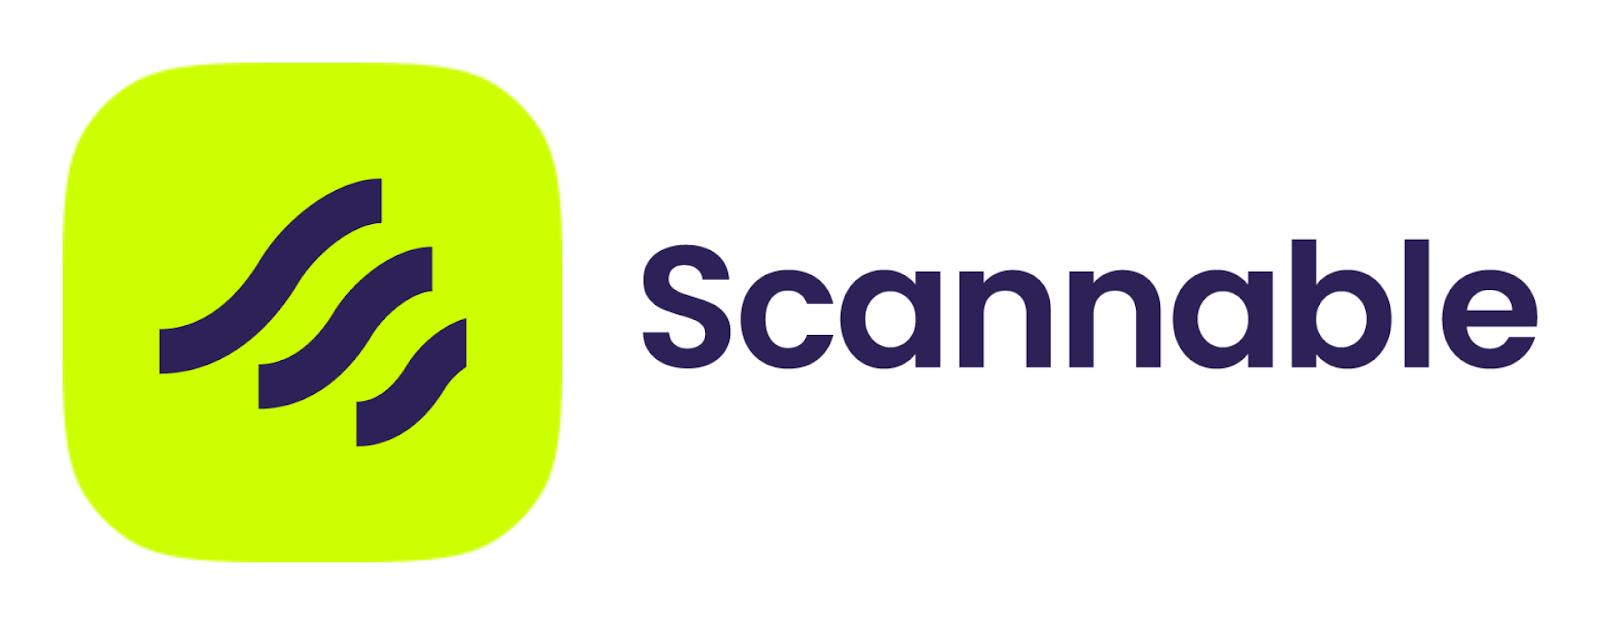 Deliver NFTs with Scannable NFC Tags